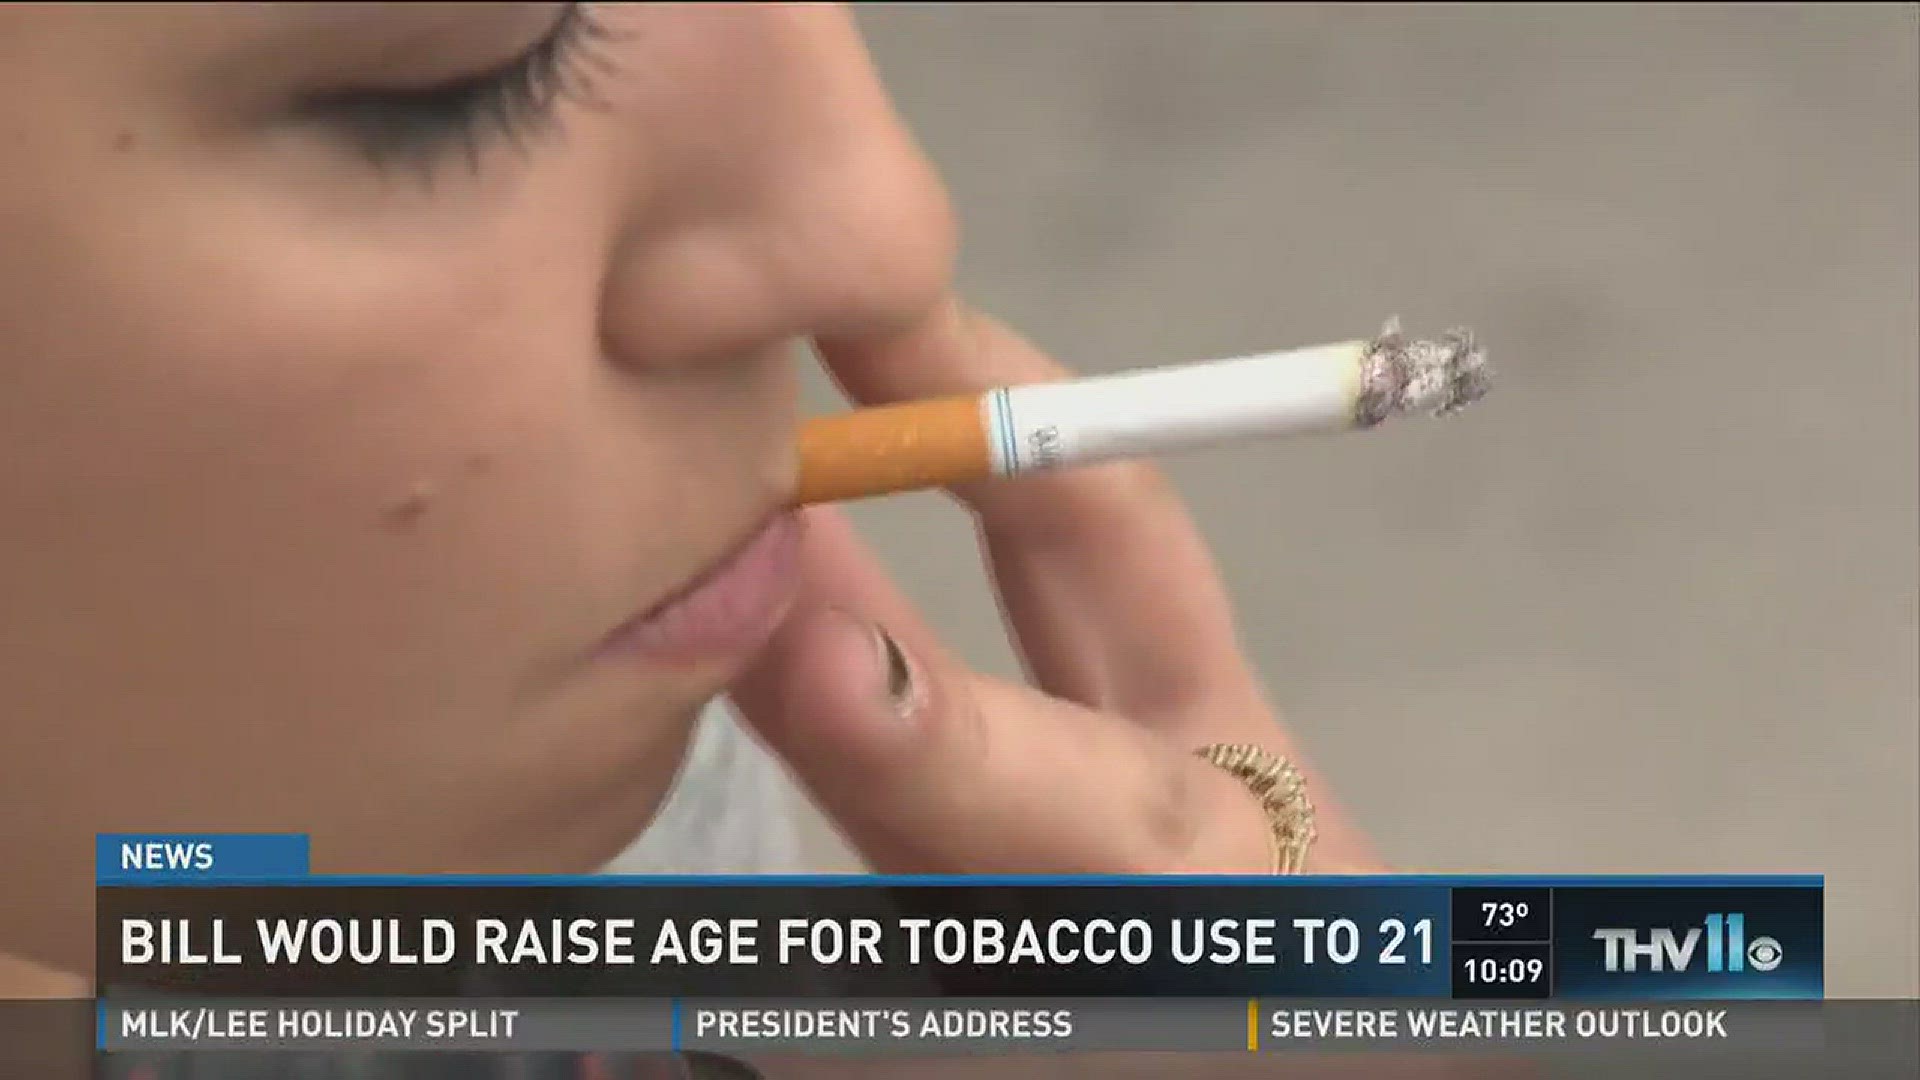 Bill would raise age for tobacco use to 21